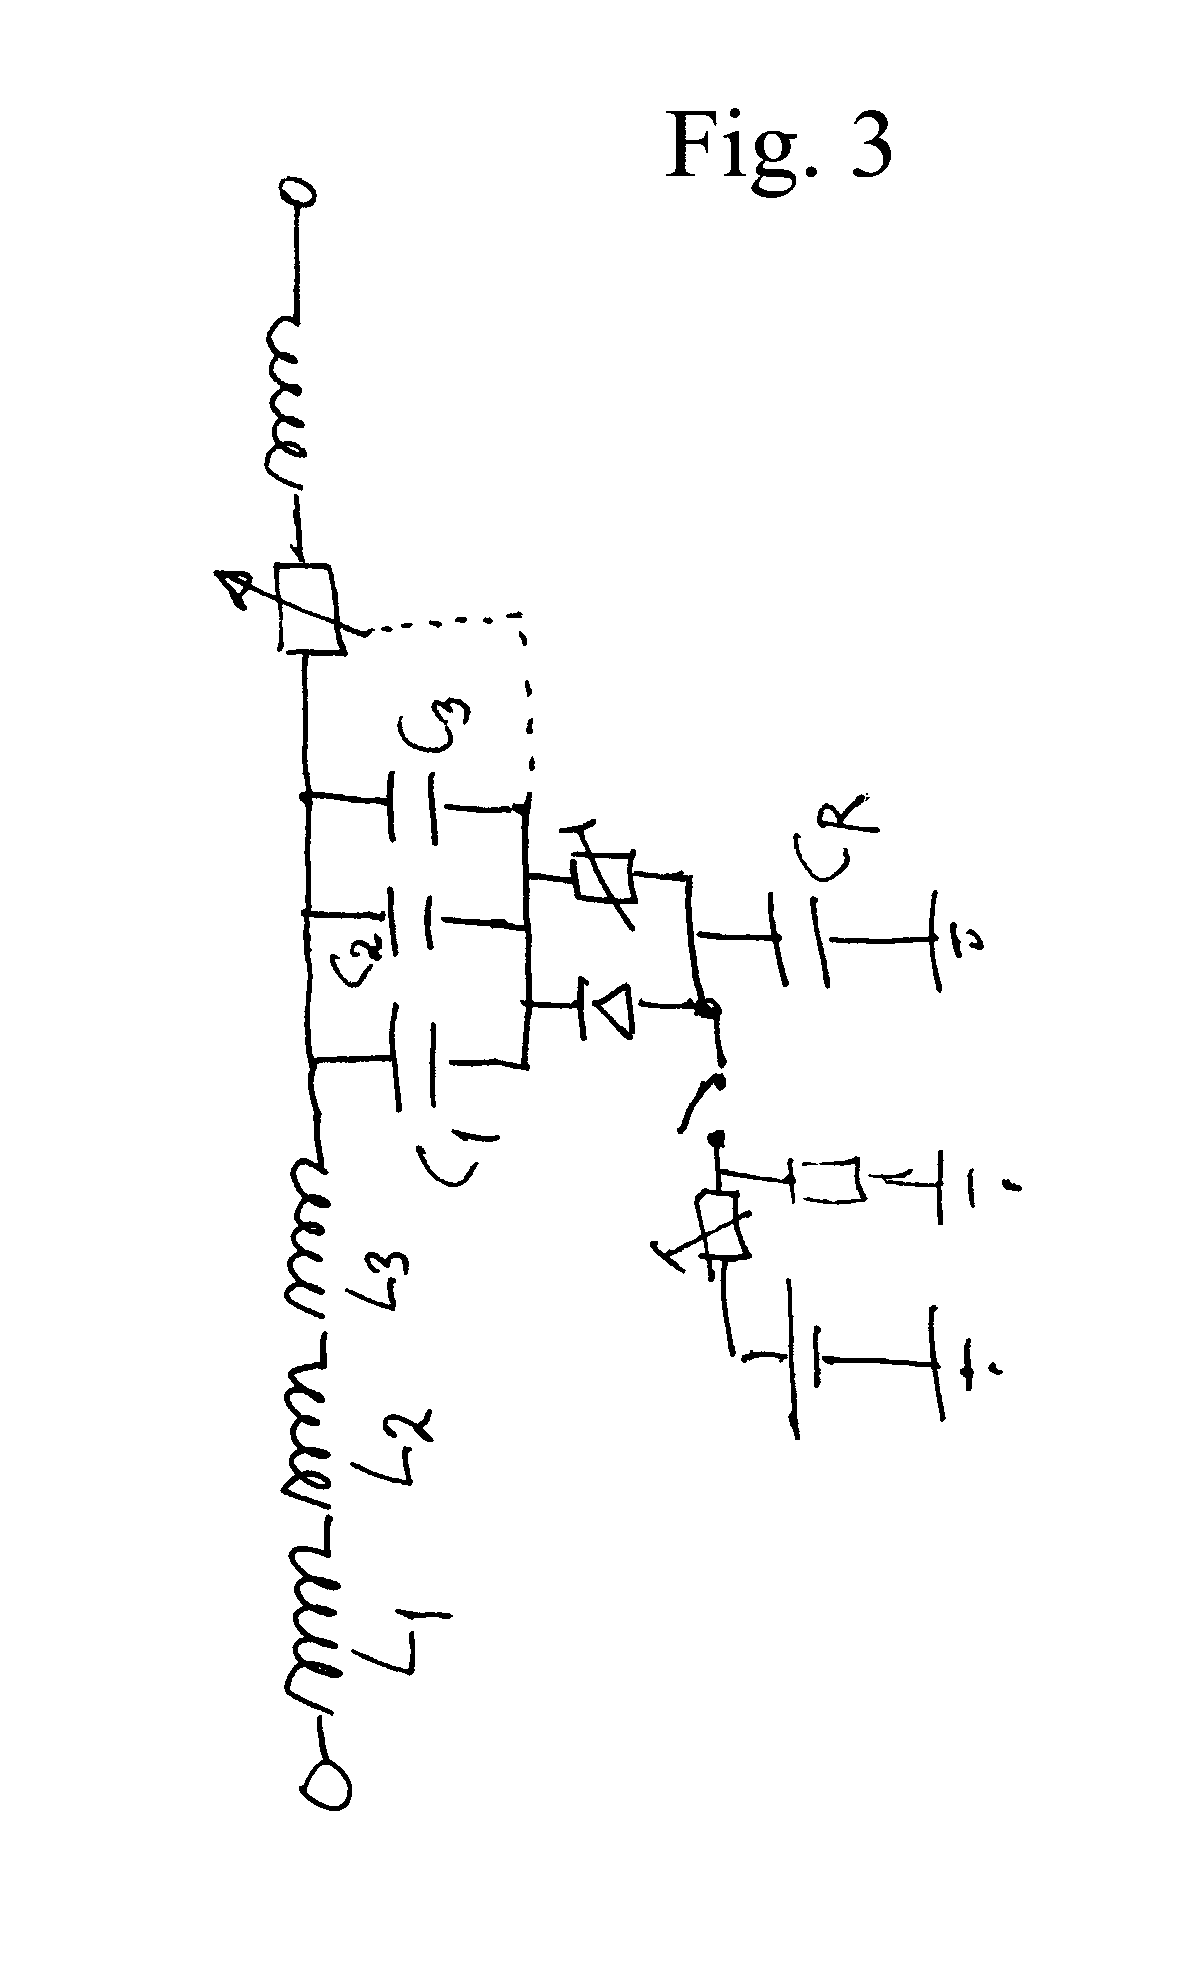 Afterload device for a beating heart during examination thereof